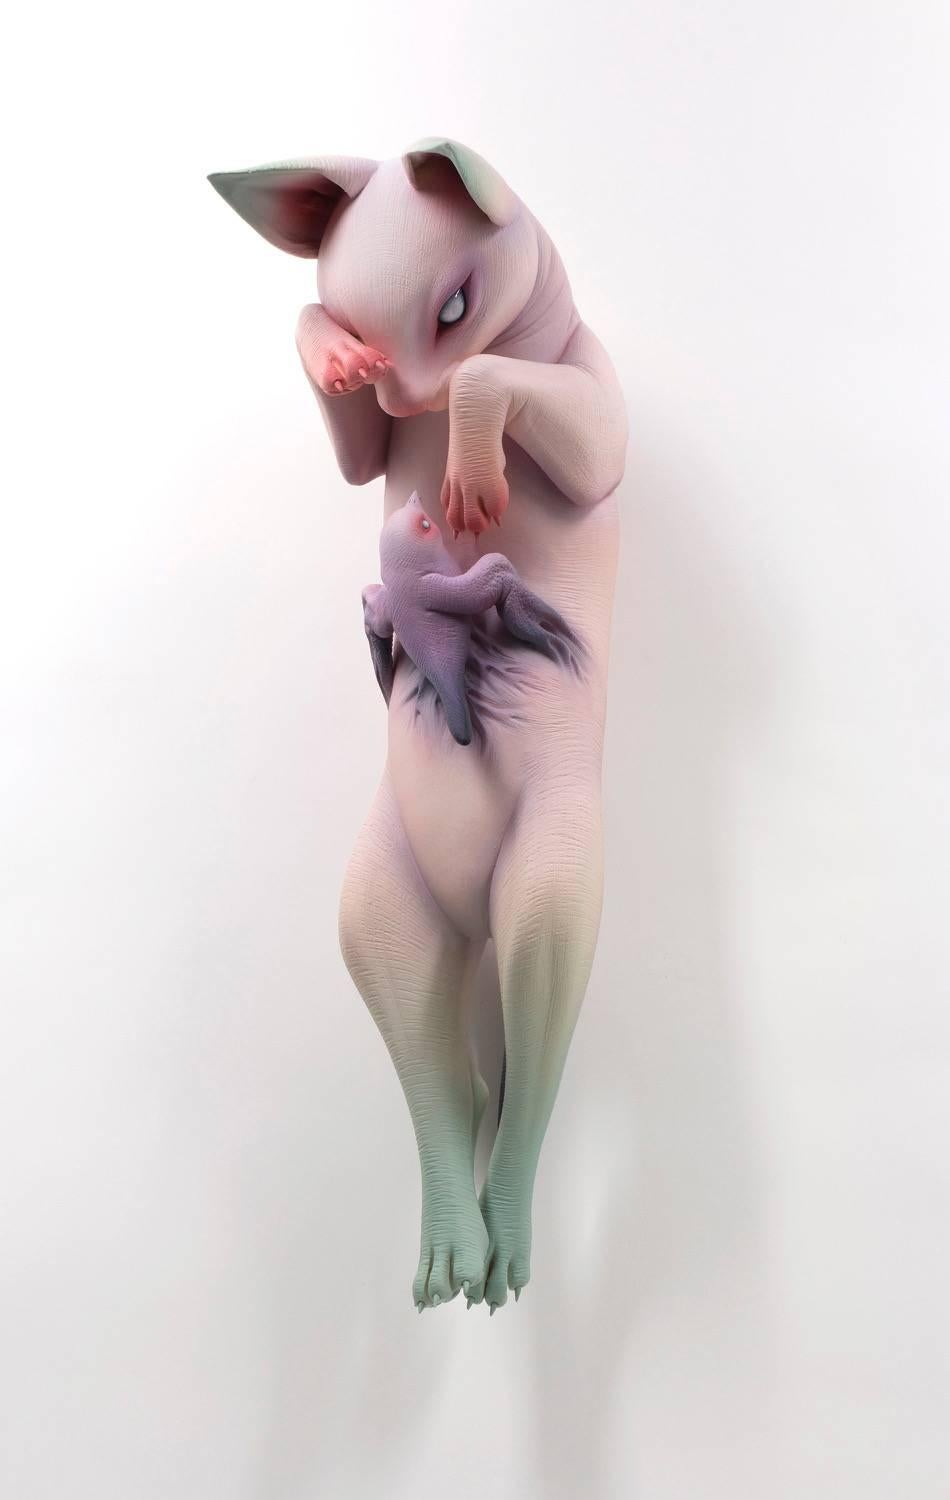 Erika Sanada Figurative Sculpture - "Face to Face", Hand Constructed Porcelain Sculpture, Wall Mounted